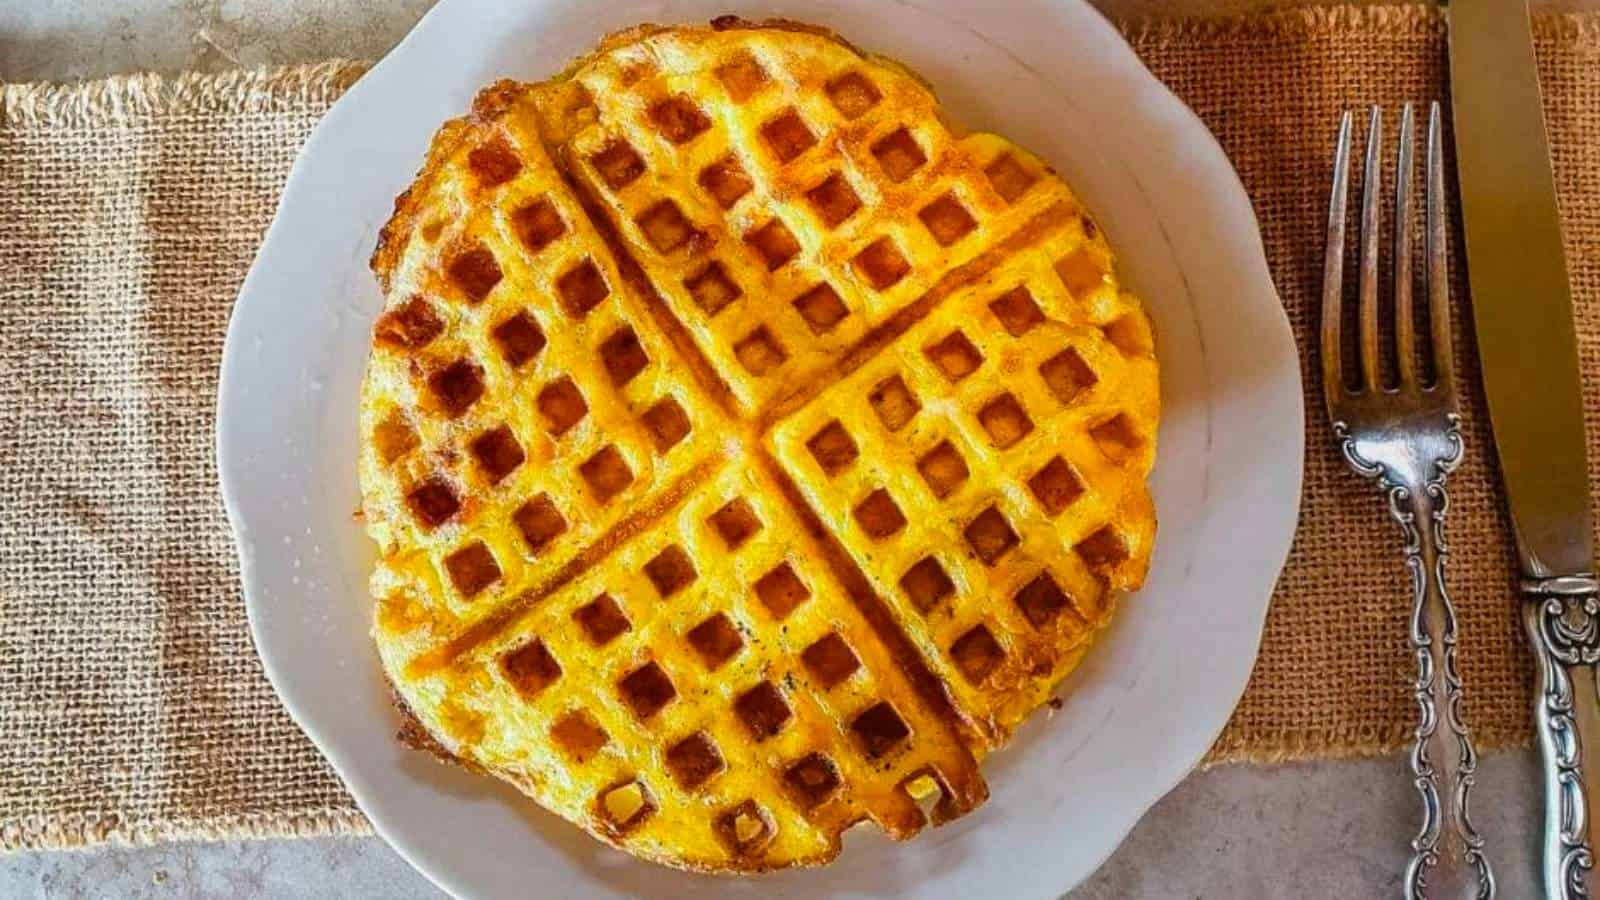 Waffles on a plate with a fork and knife.